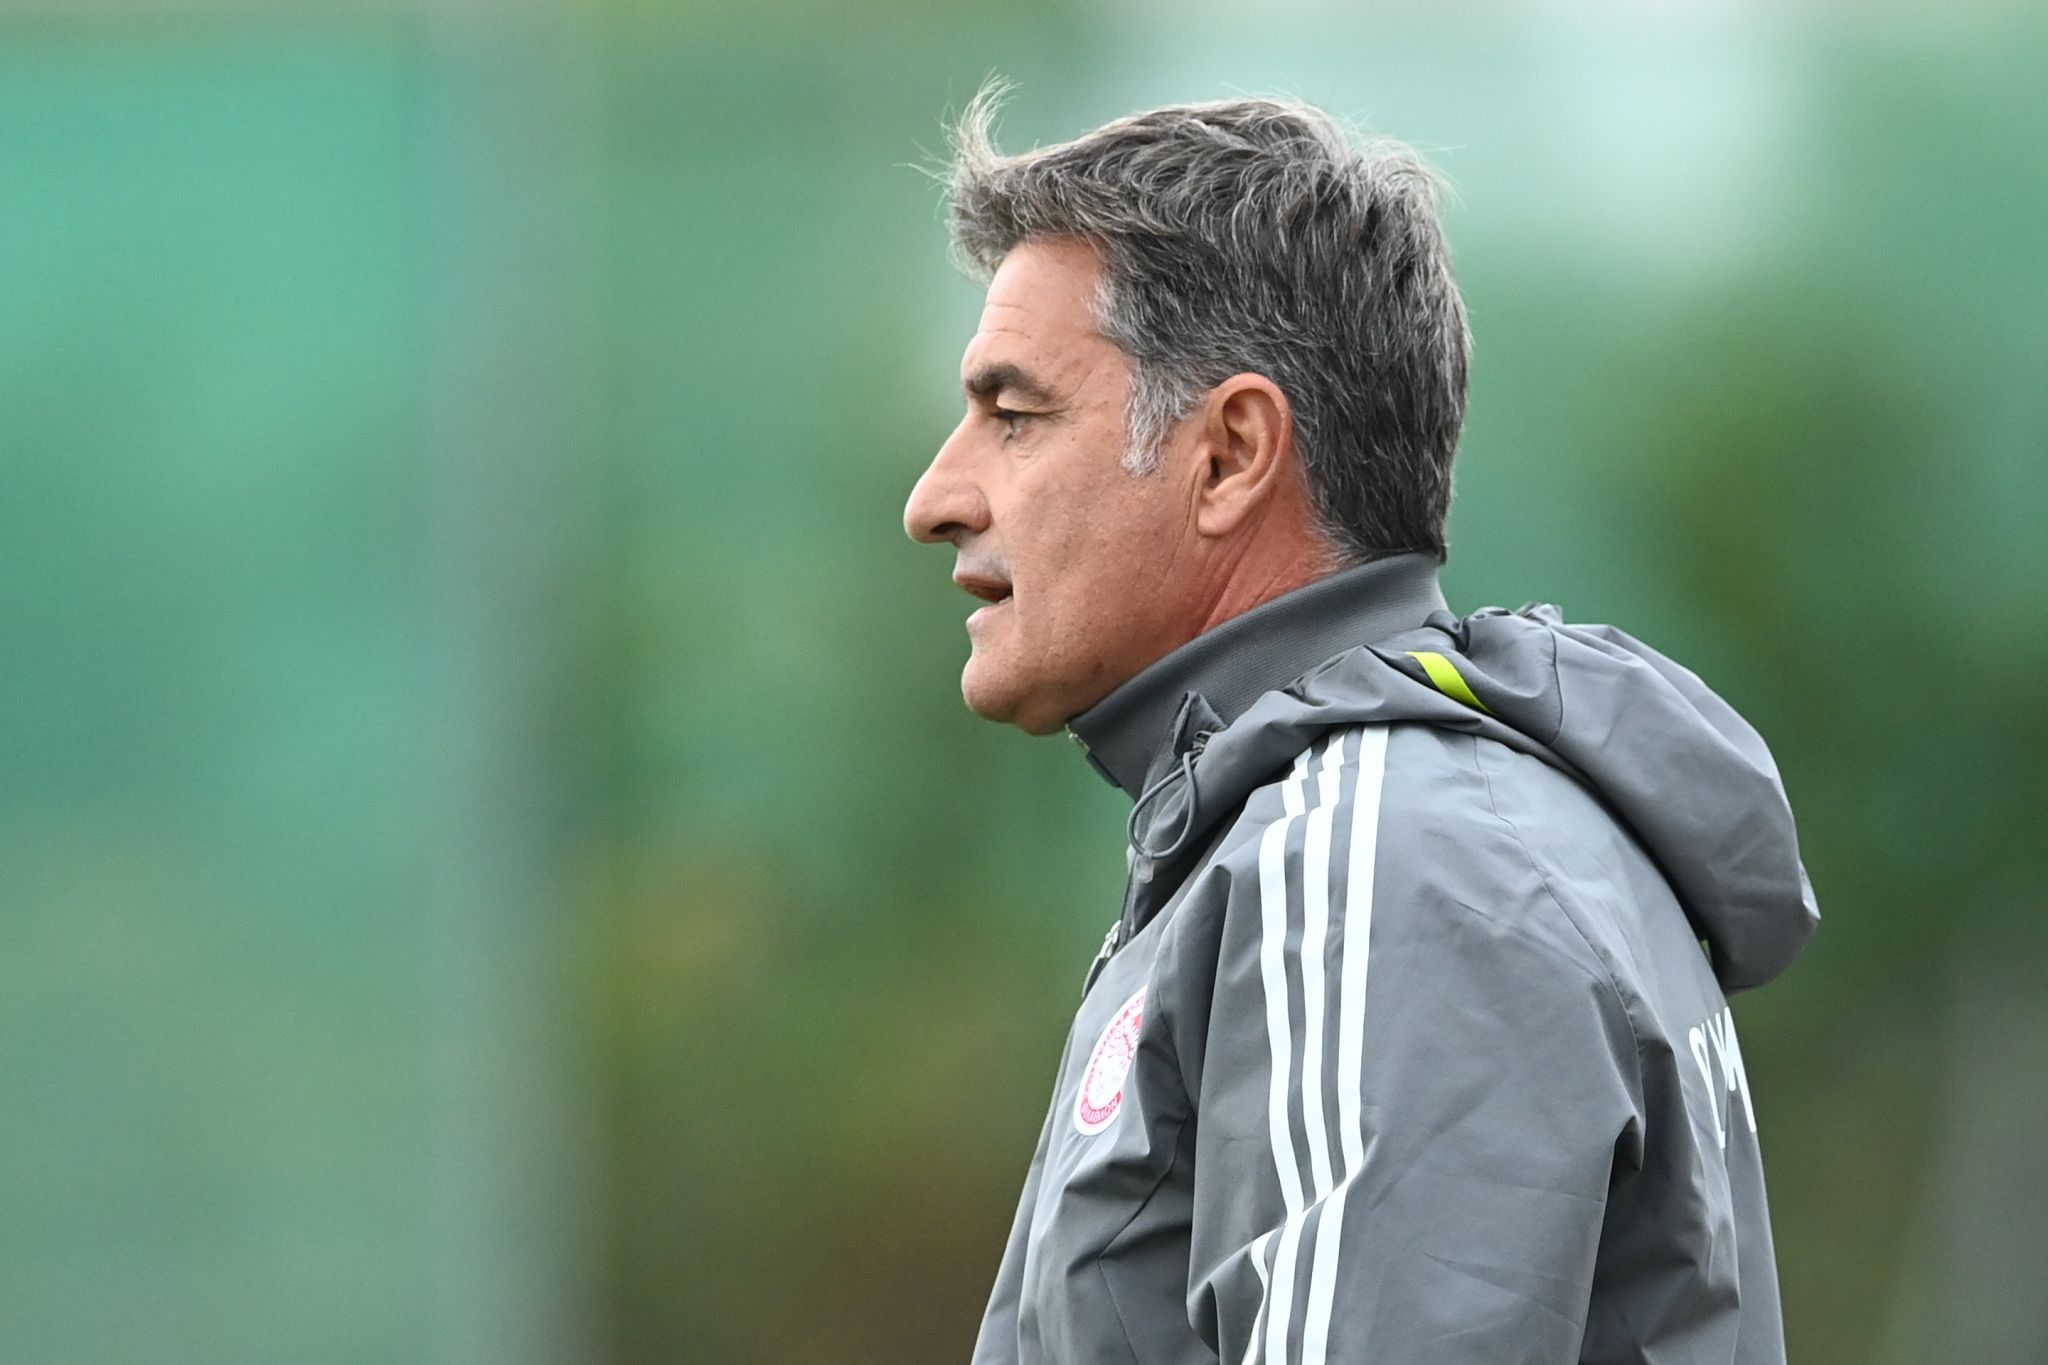 Míchel: “We put out on the field the elements we’re working on”